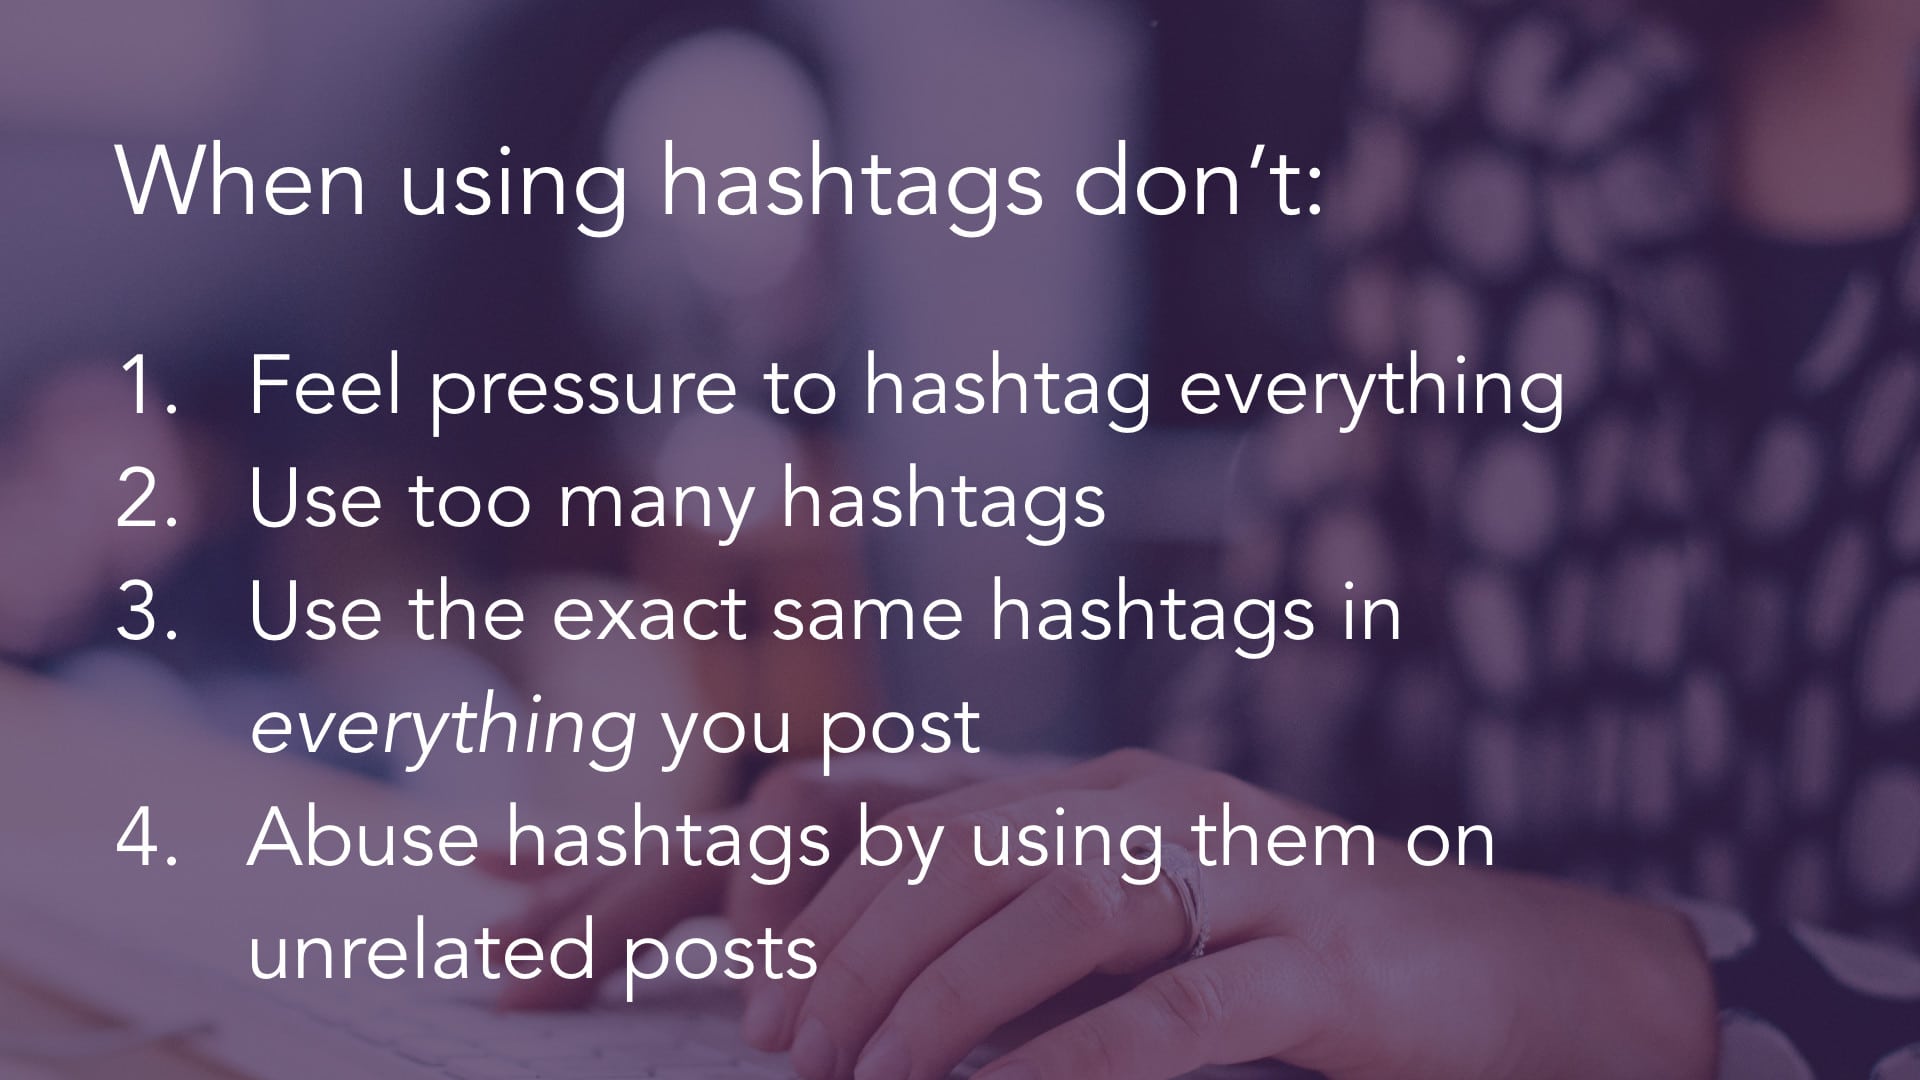 Find Appropriate Hashtags